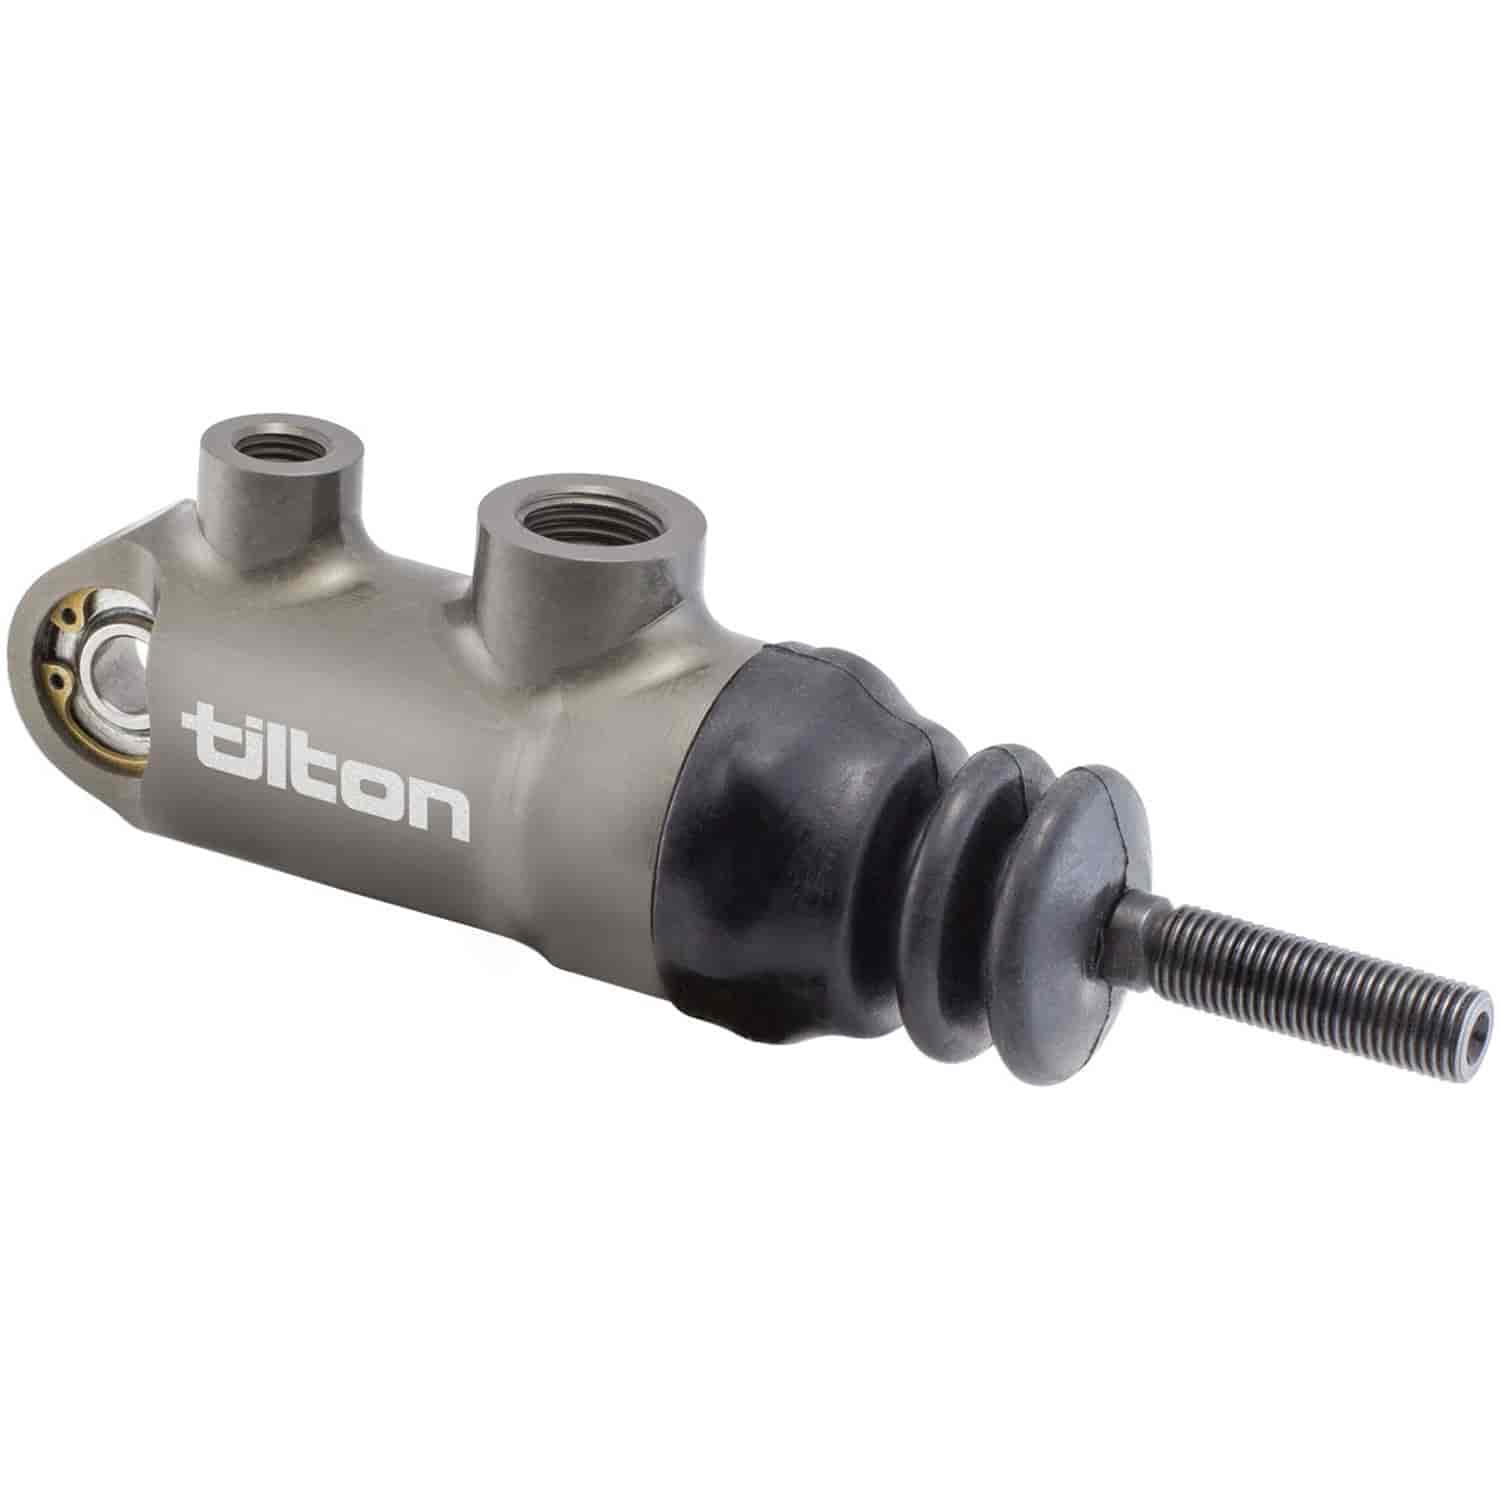 78-Series Master Cylinder 7/8" Bore